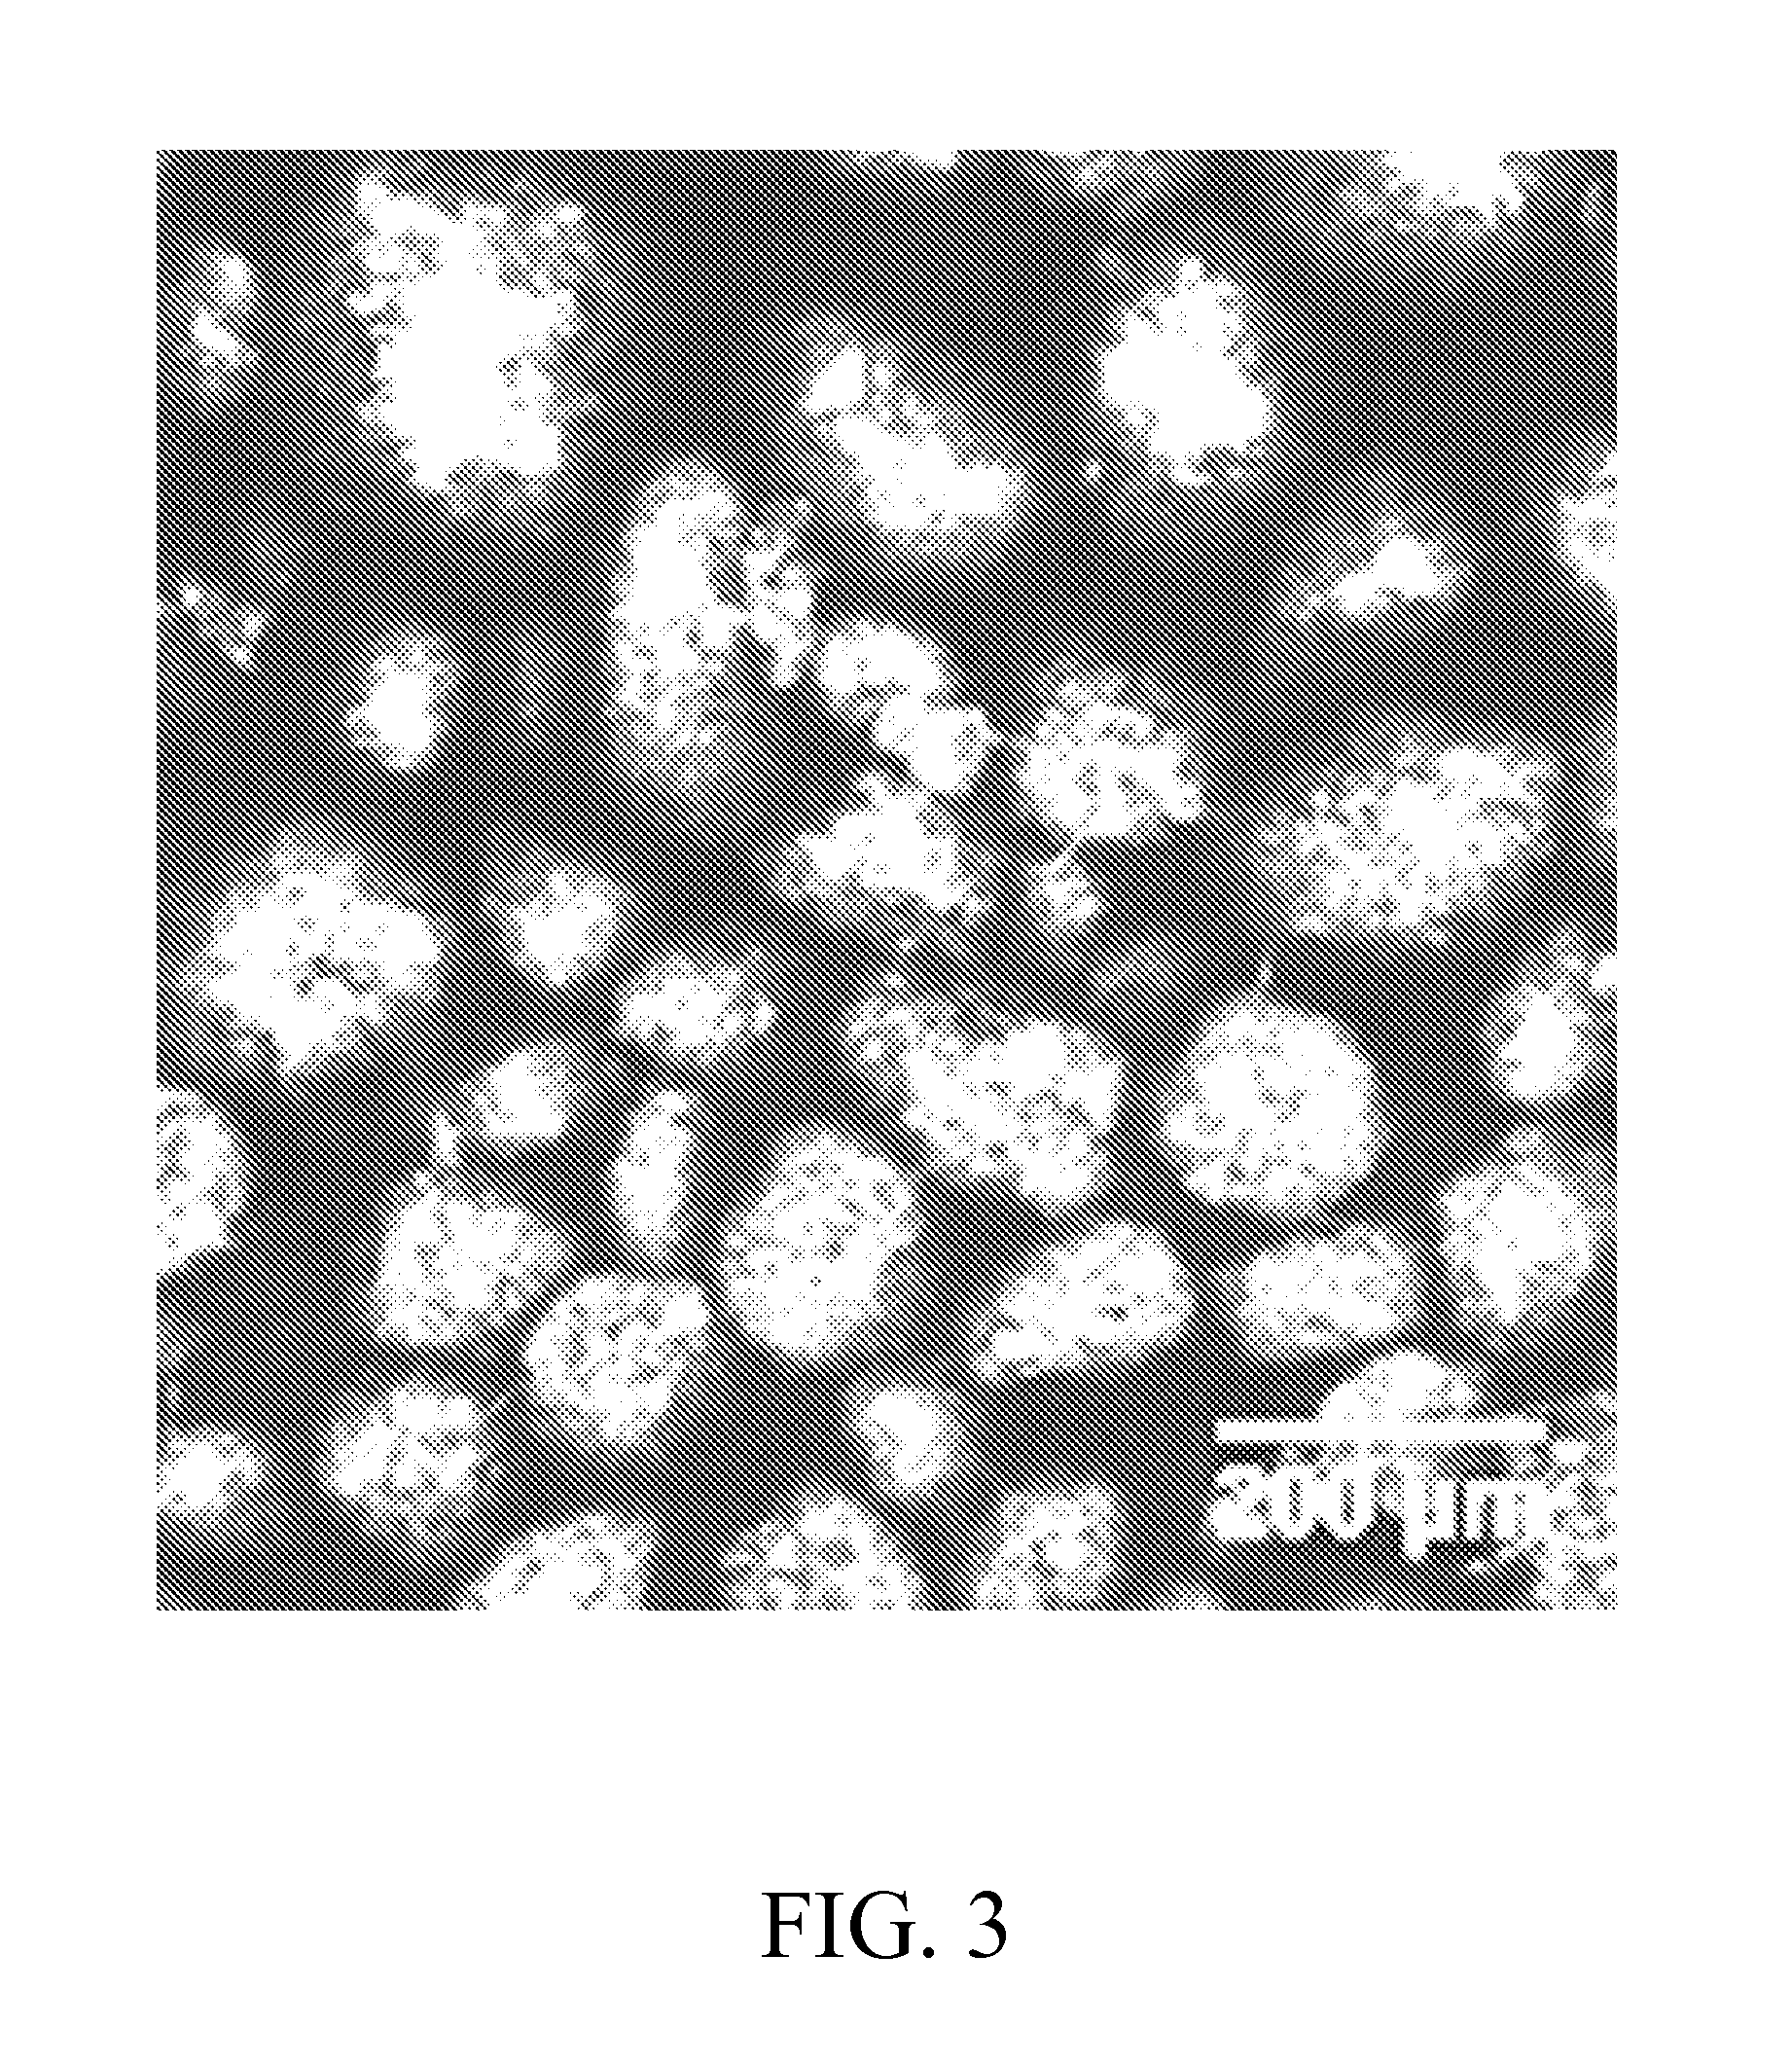 Systems and methods for acid-treating glass articles